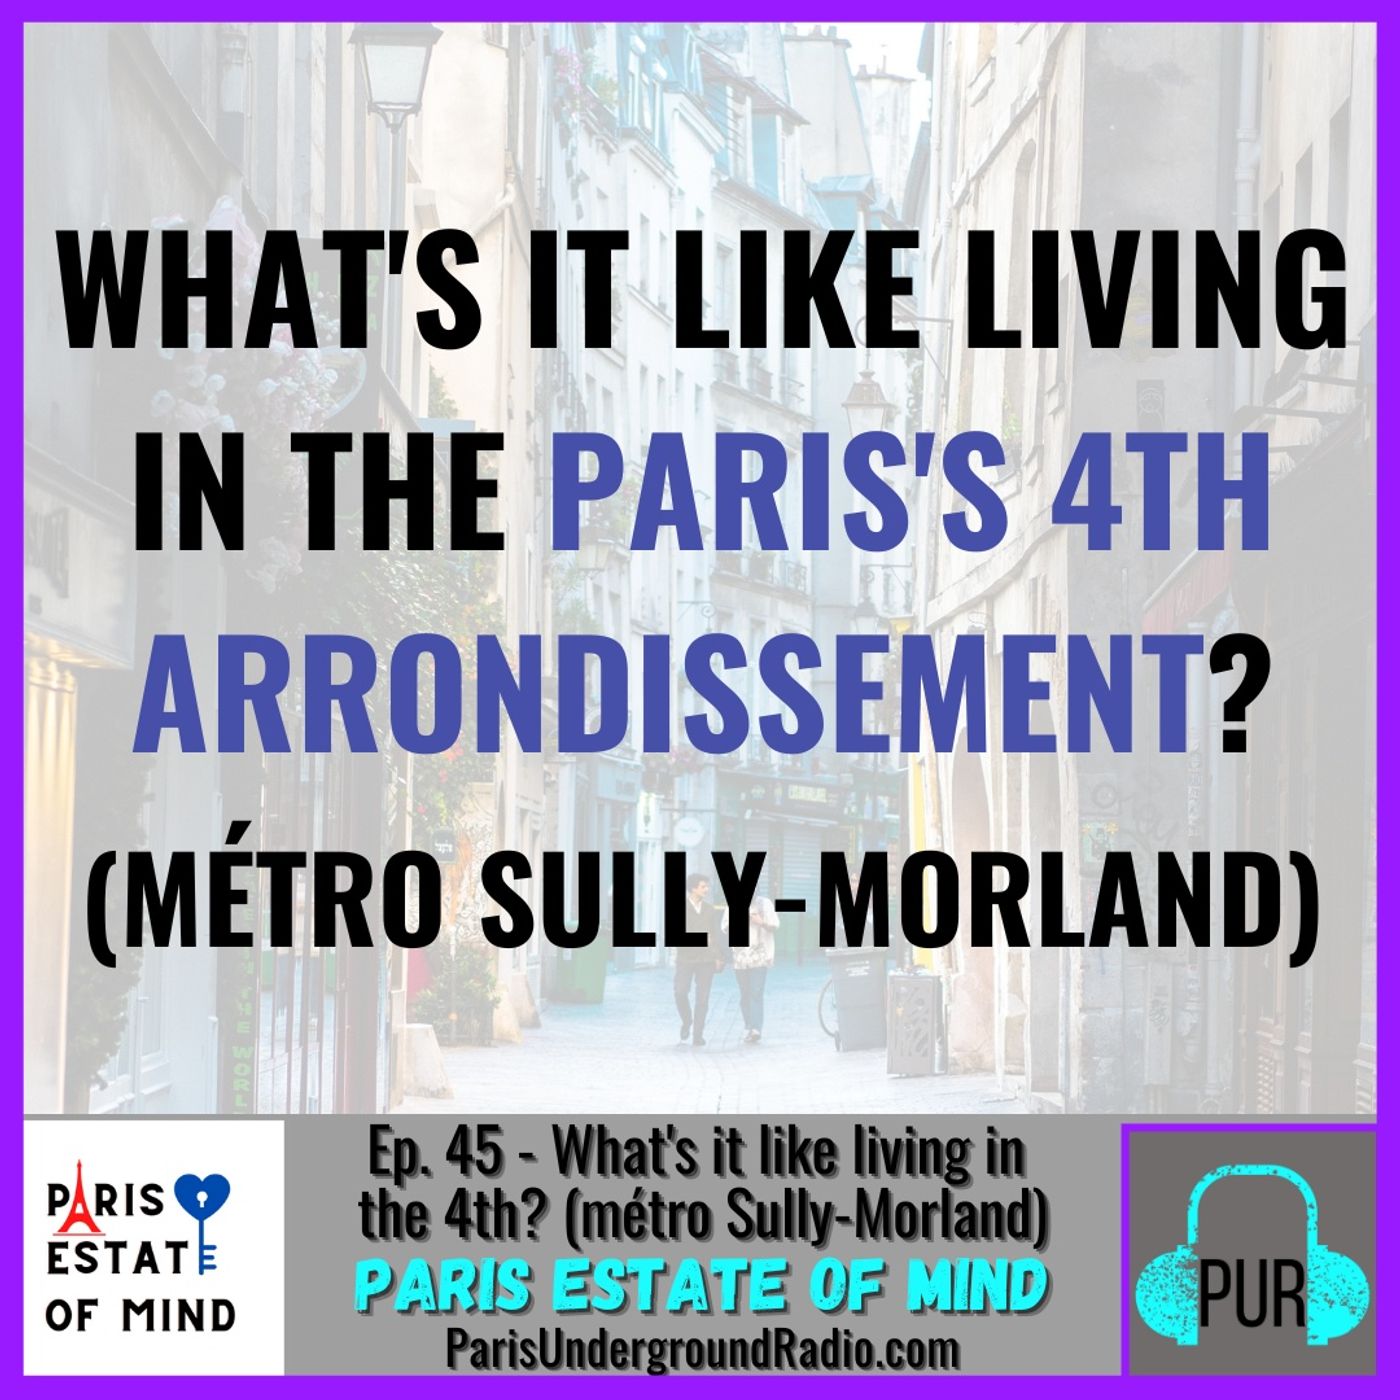 What's it like living in the 4th? (métro Sully-Morland)